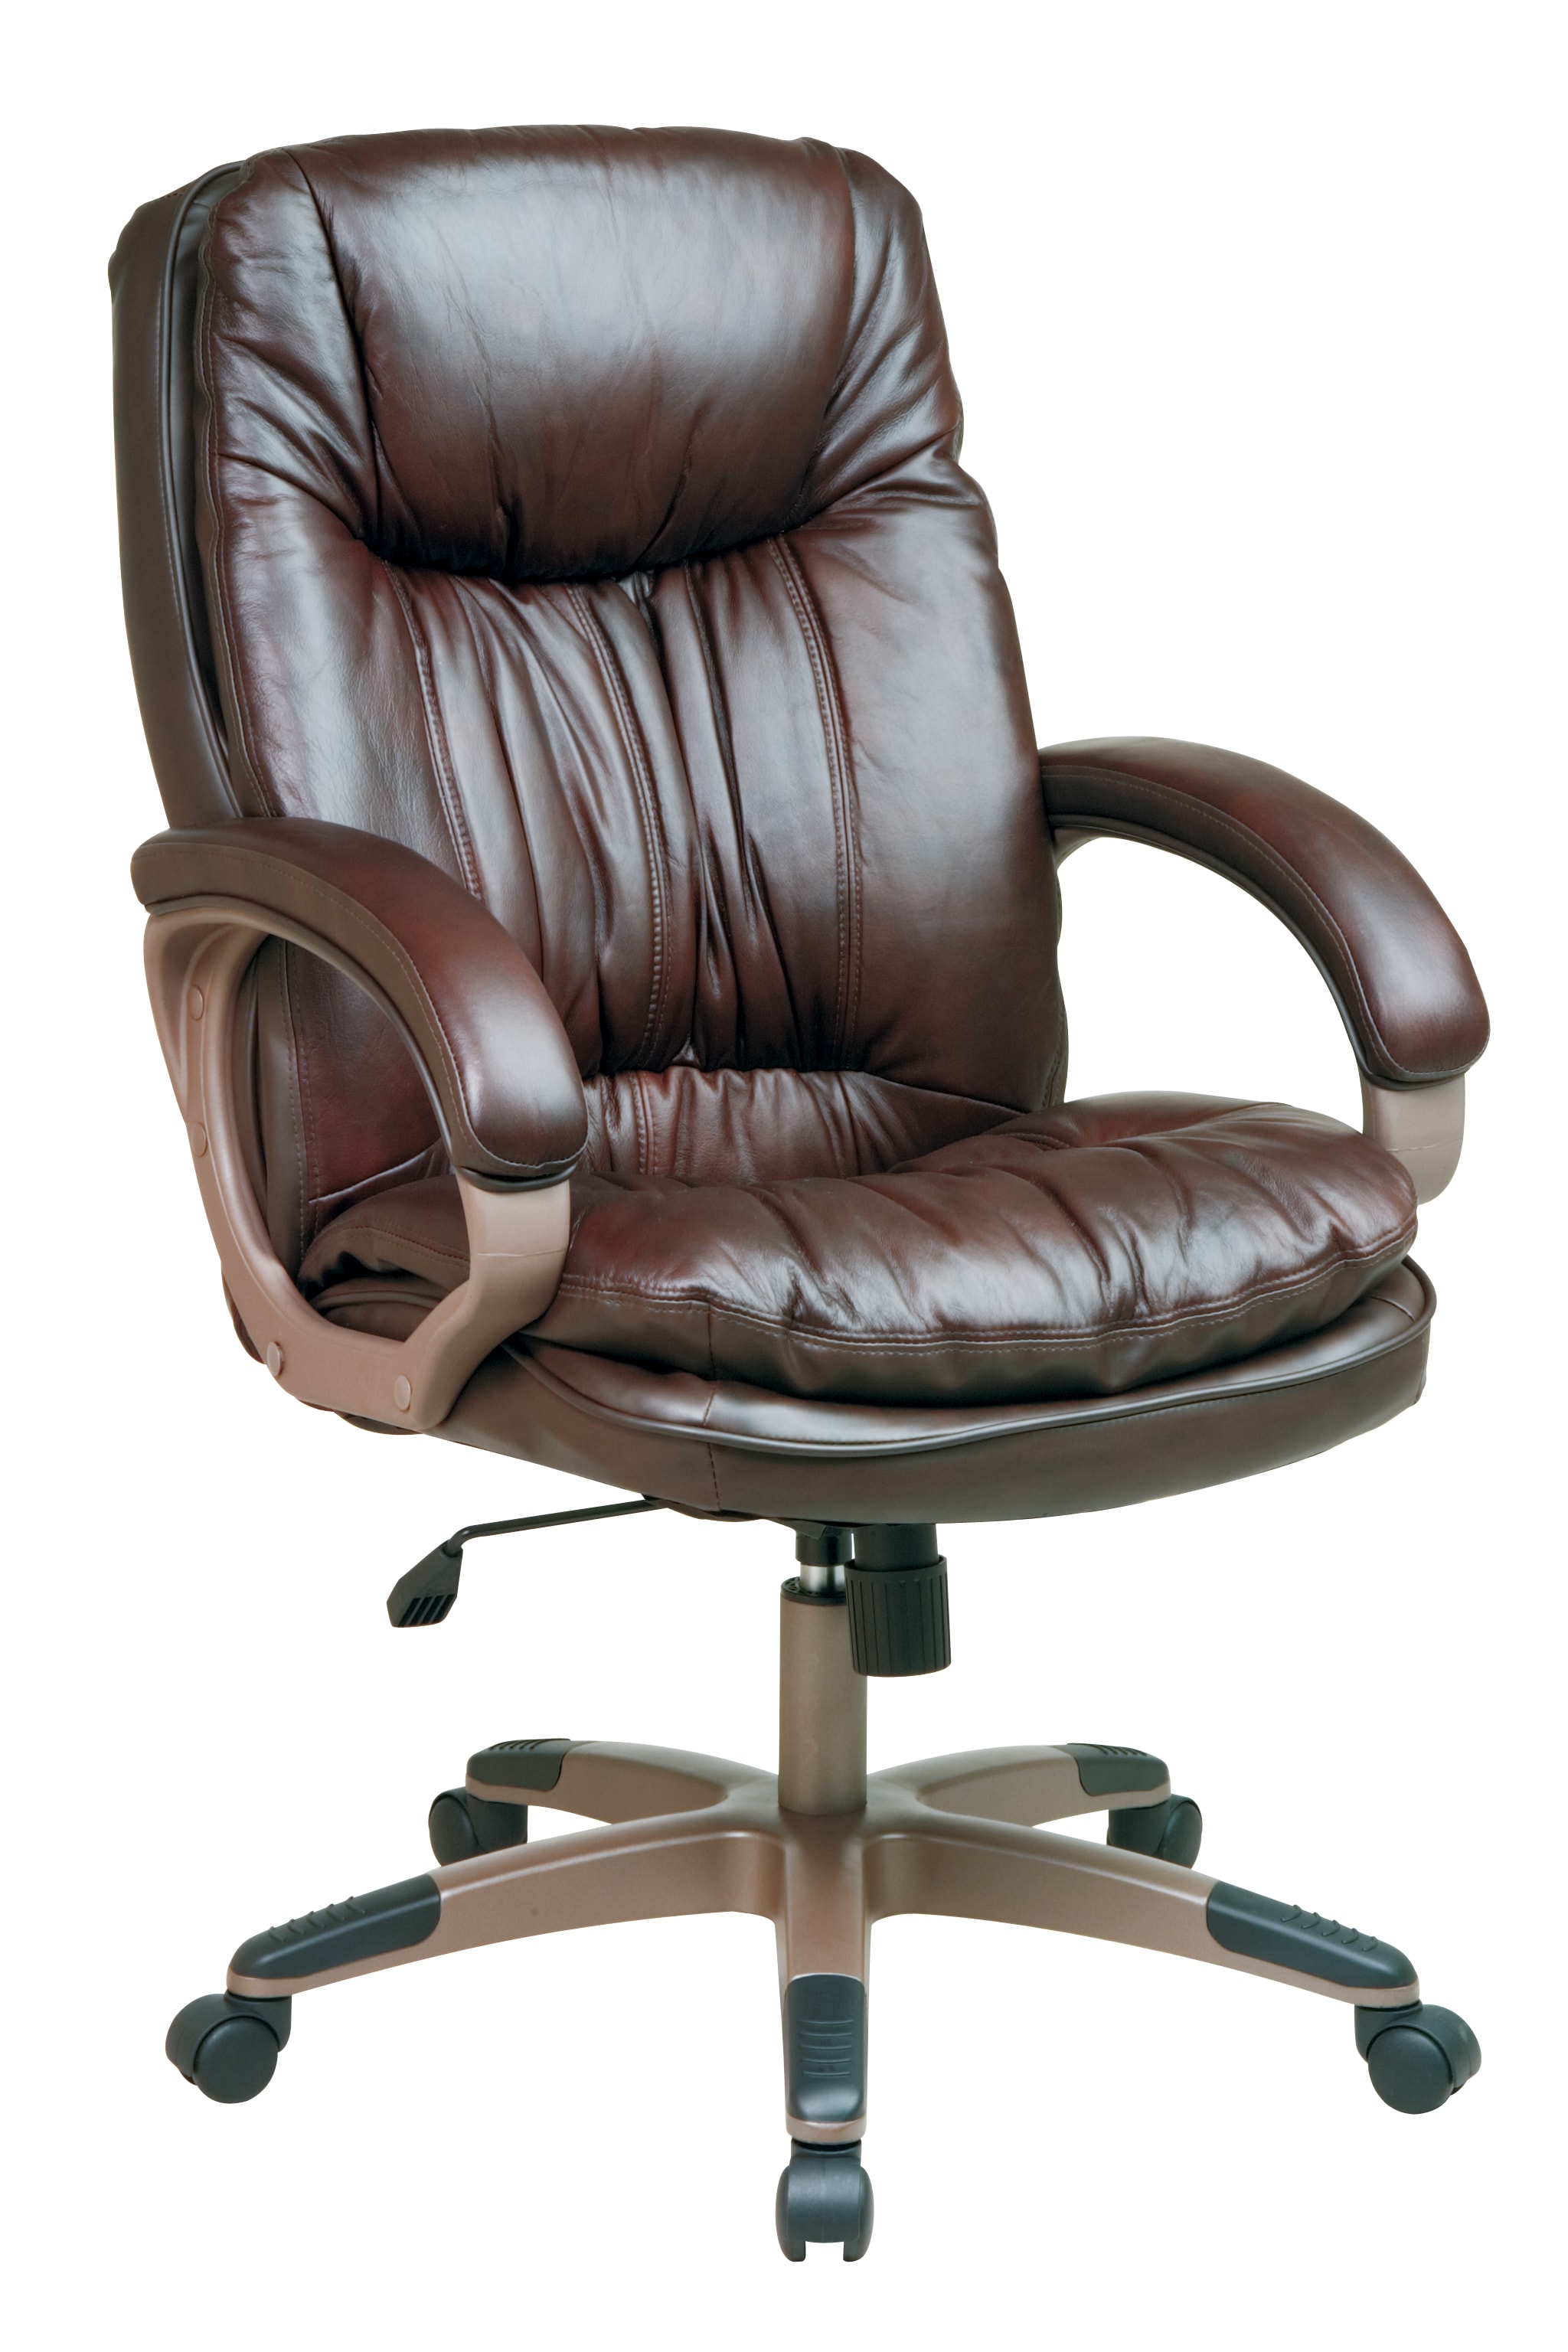 Office Star Executive Full Grain Leather Chair - Bed Bath & Beyond ...